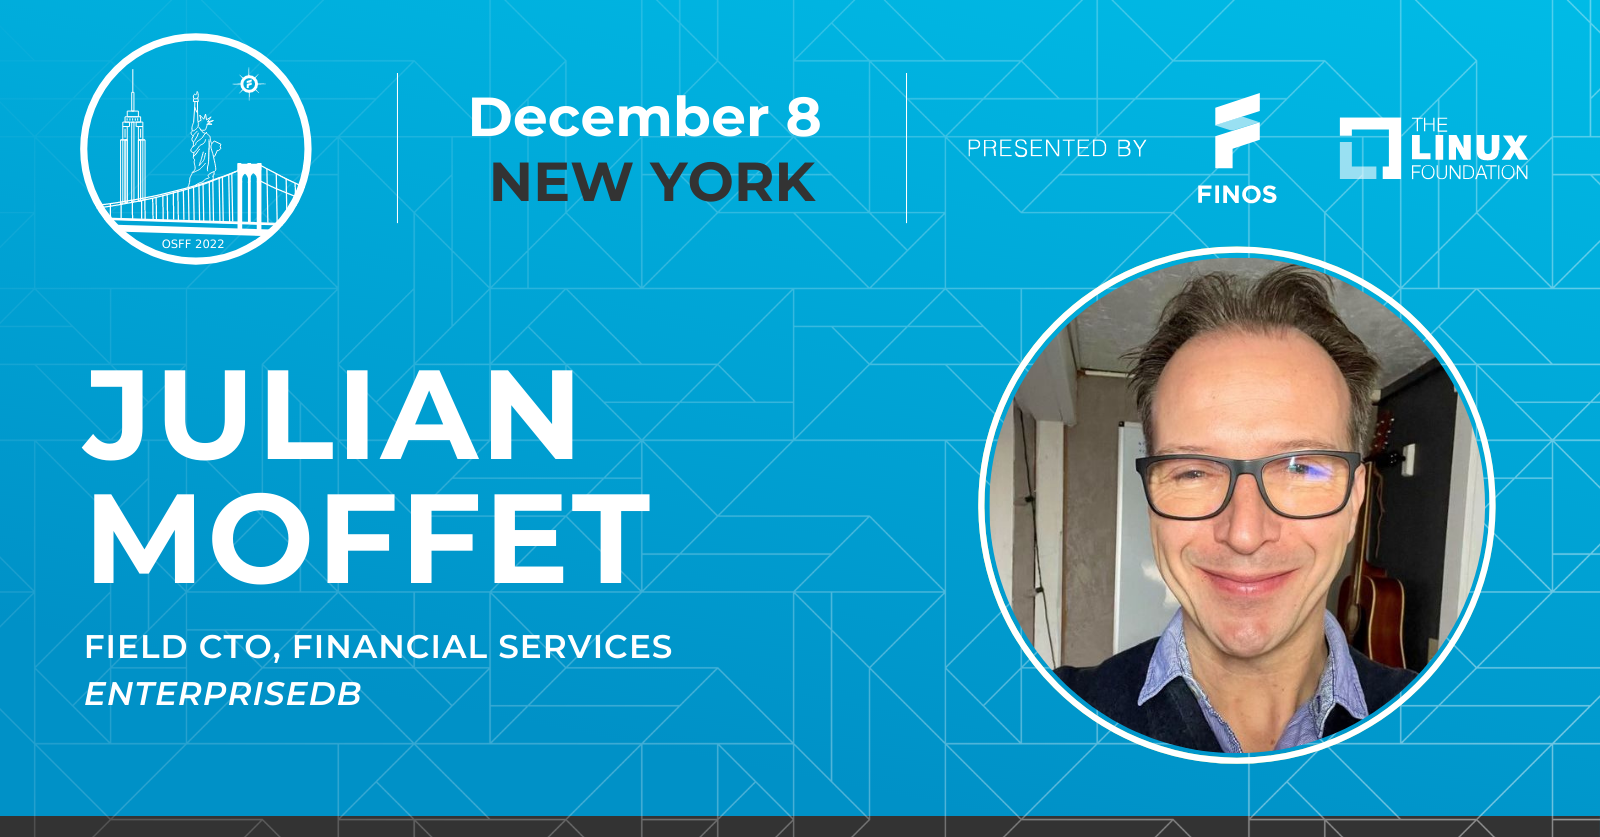 Keynote: Using Your Favorite Open Source Database at Enterprise Scale in Financial Services